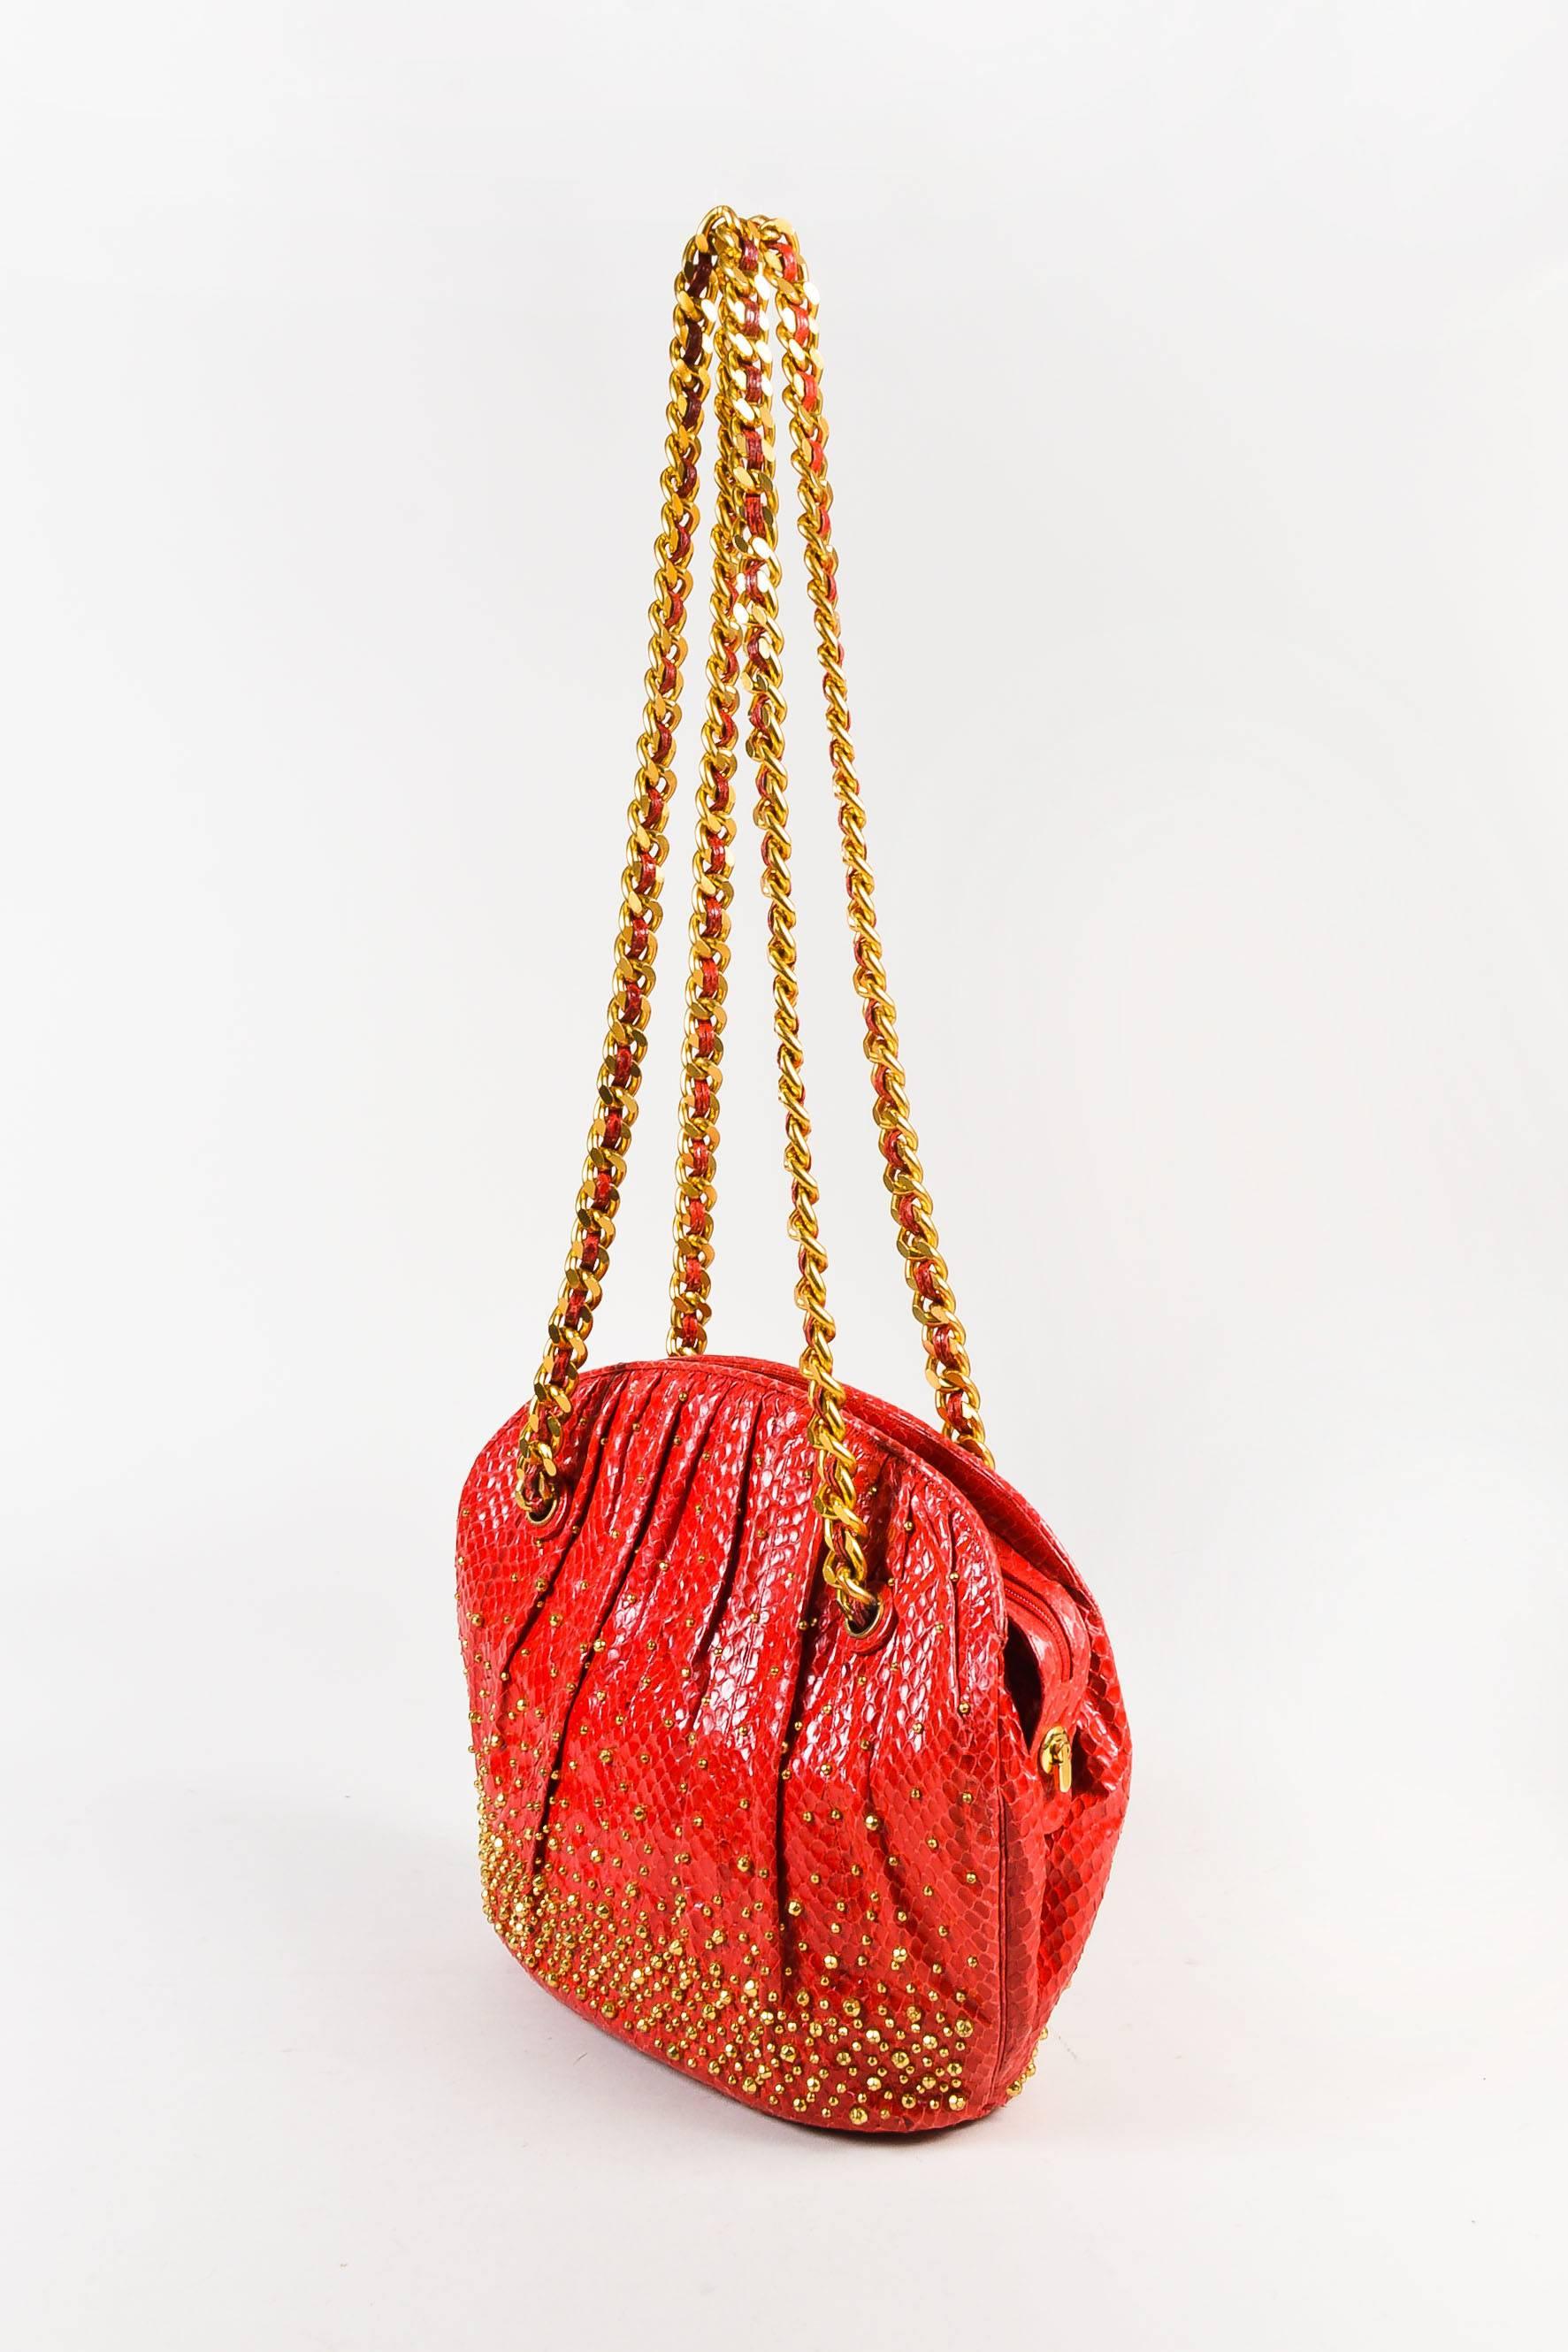 This vintage bag would pair well with black pants and a white ribbed oversized sweater. Comes with a coin purse, comb, and mirror. Red genuine python leather pleated shoulder bag from Judith Lieber features gold-tone studs throughout. Five gold-tone